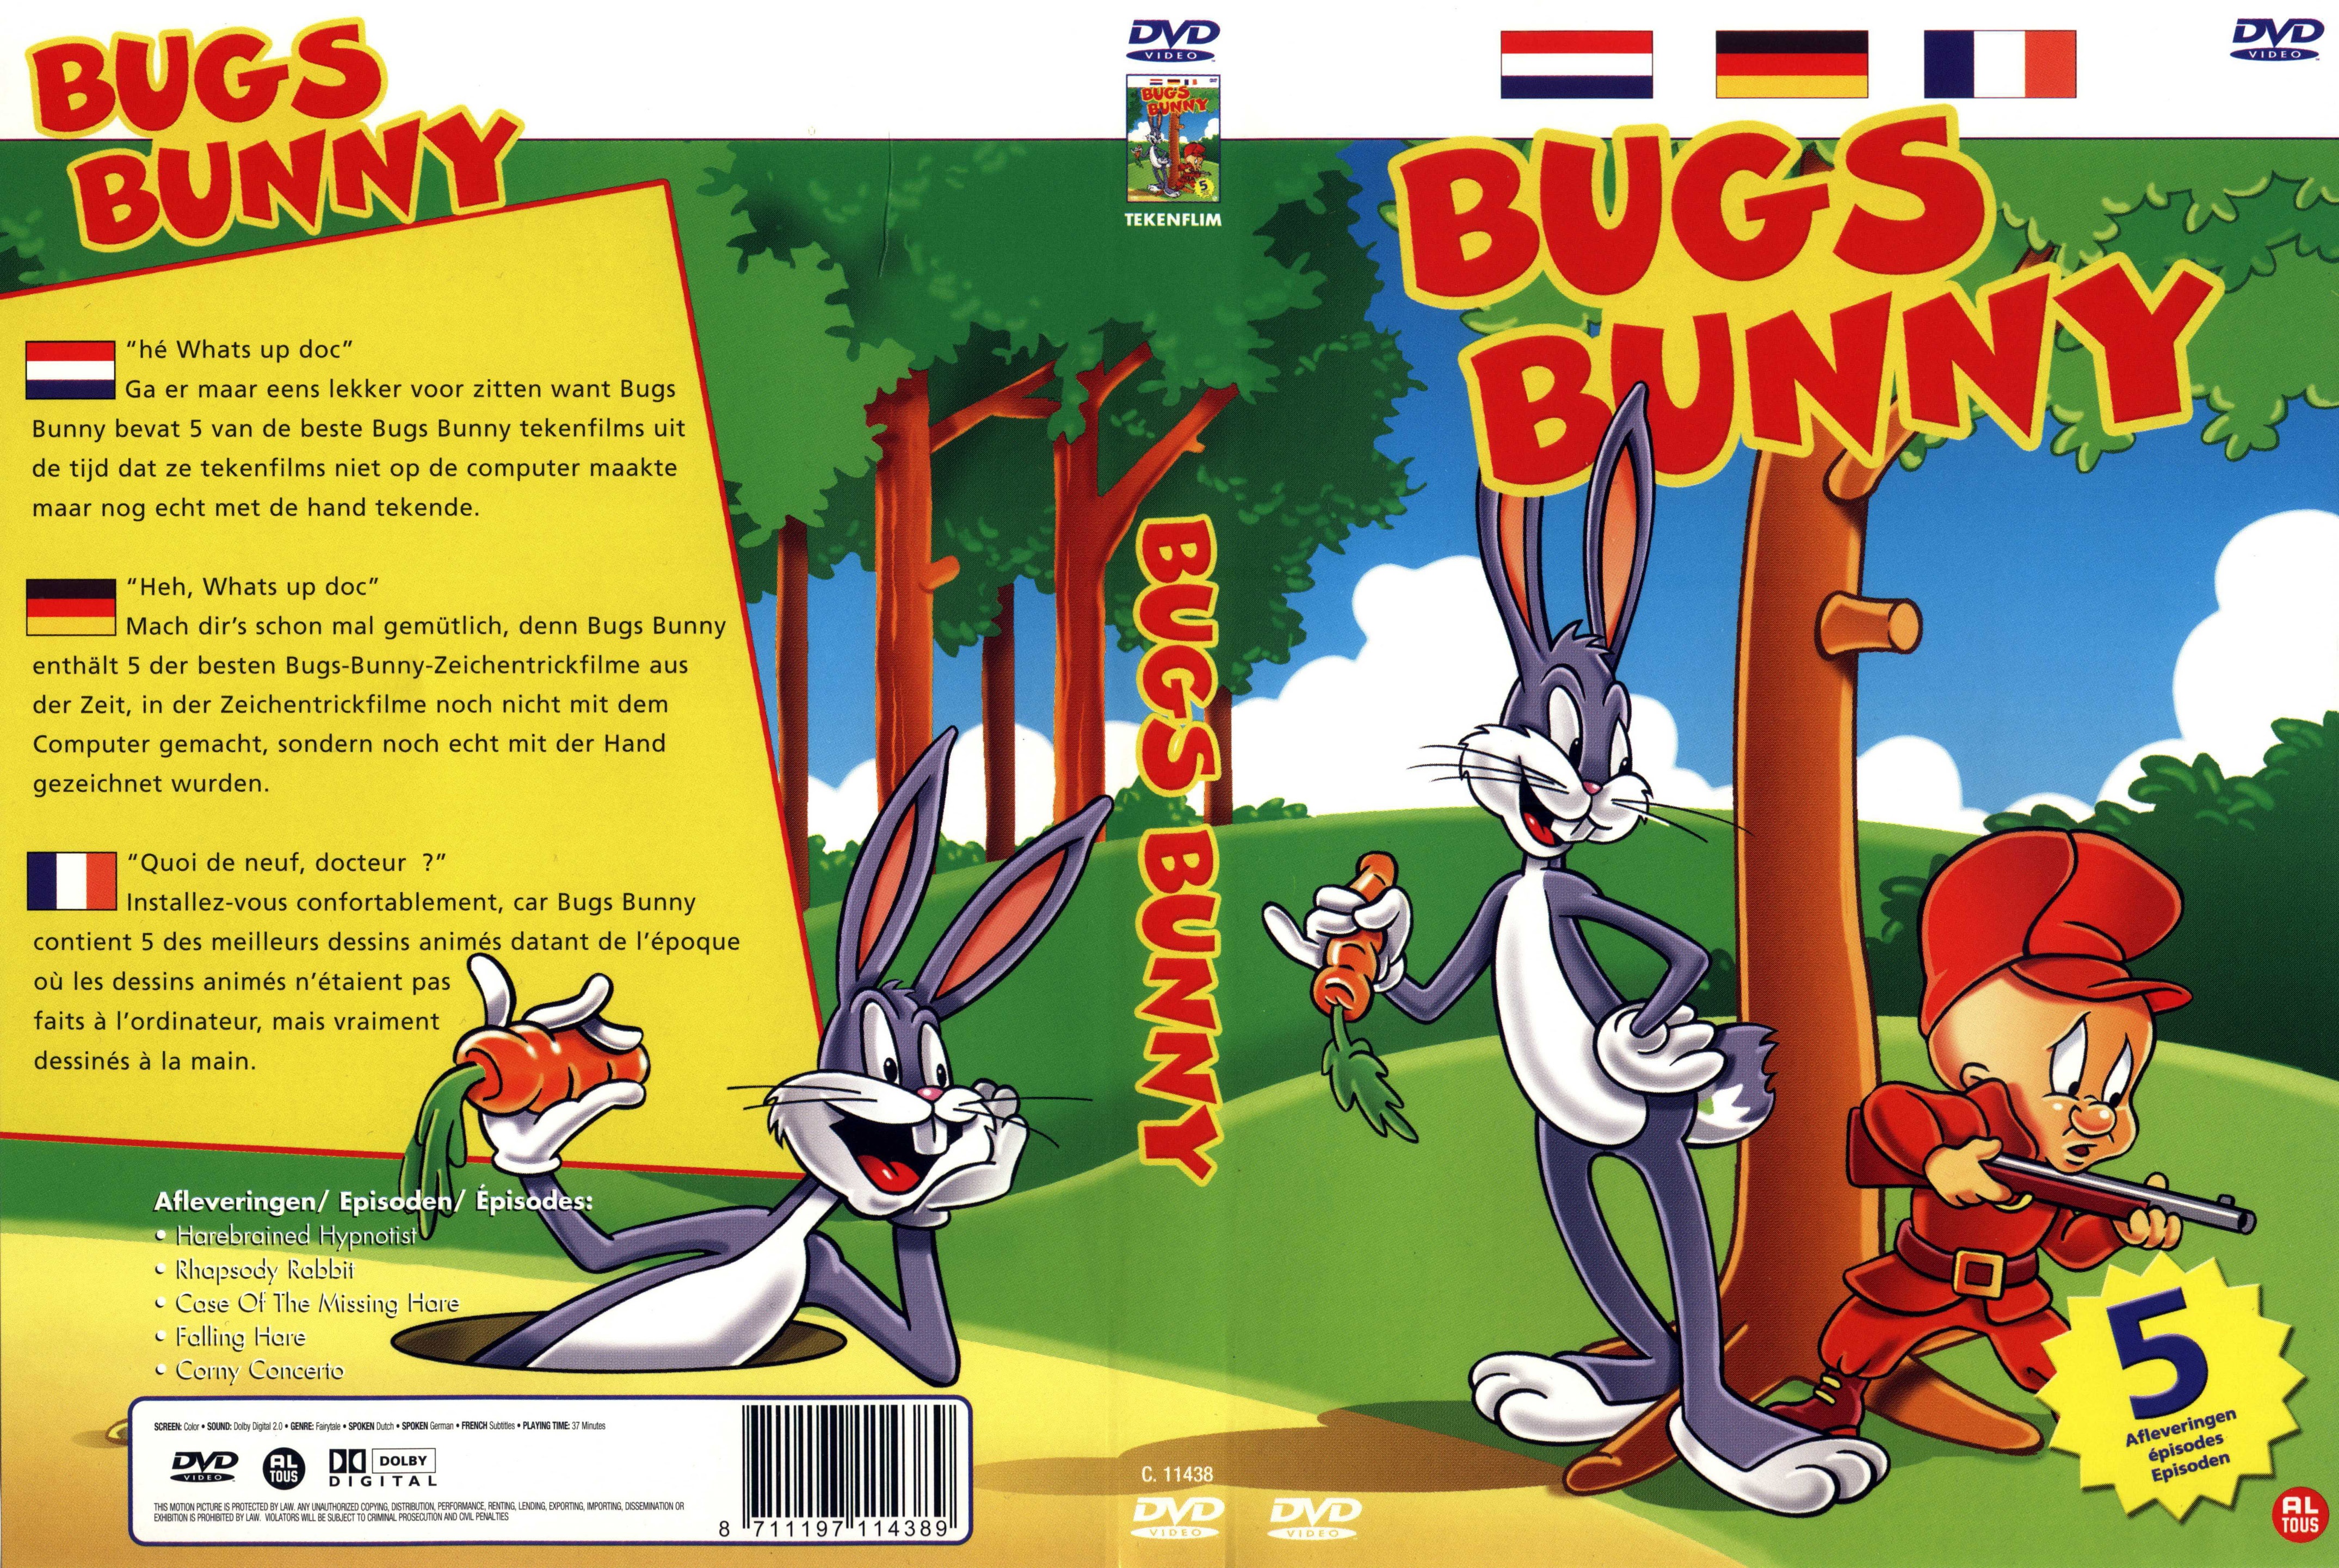 Jaquette DVD Bugs Bunny